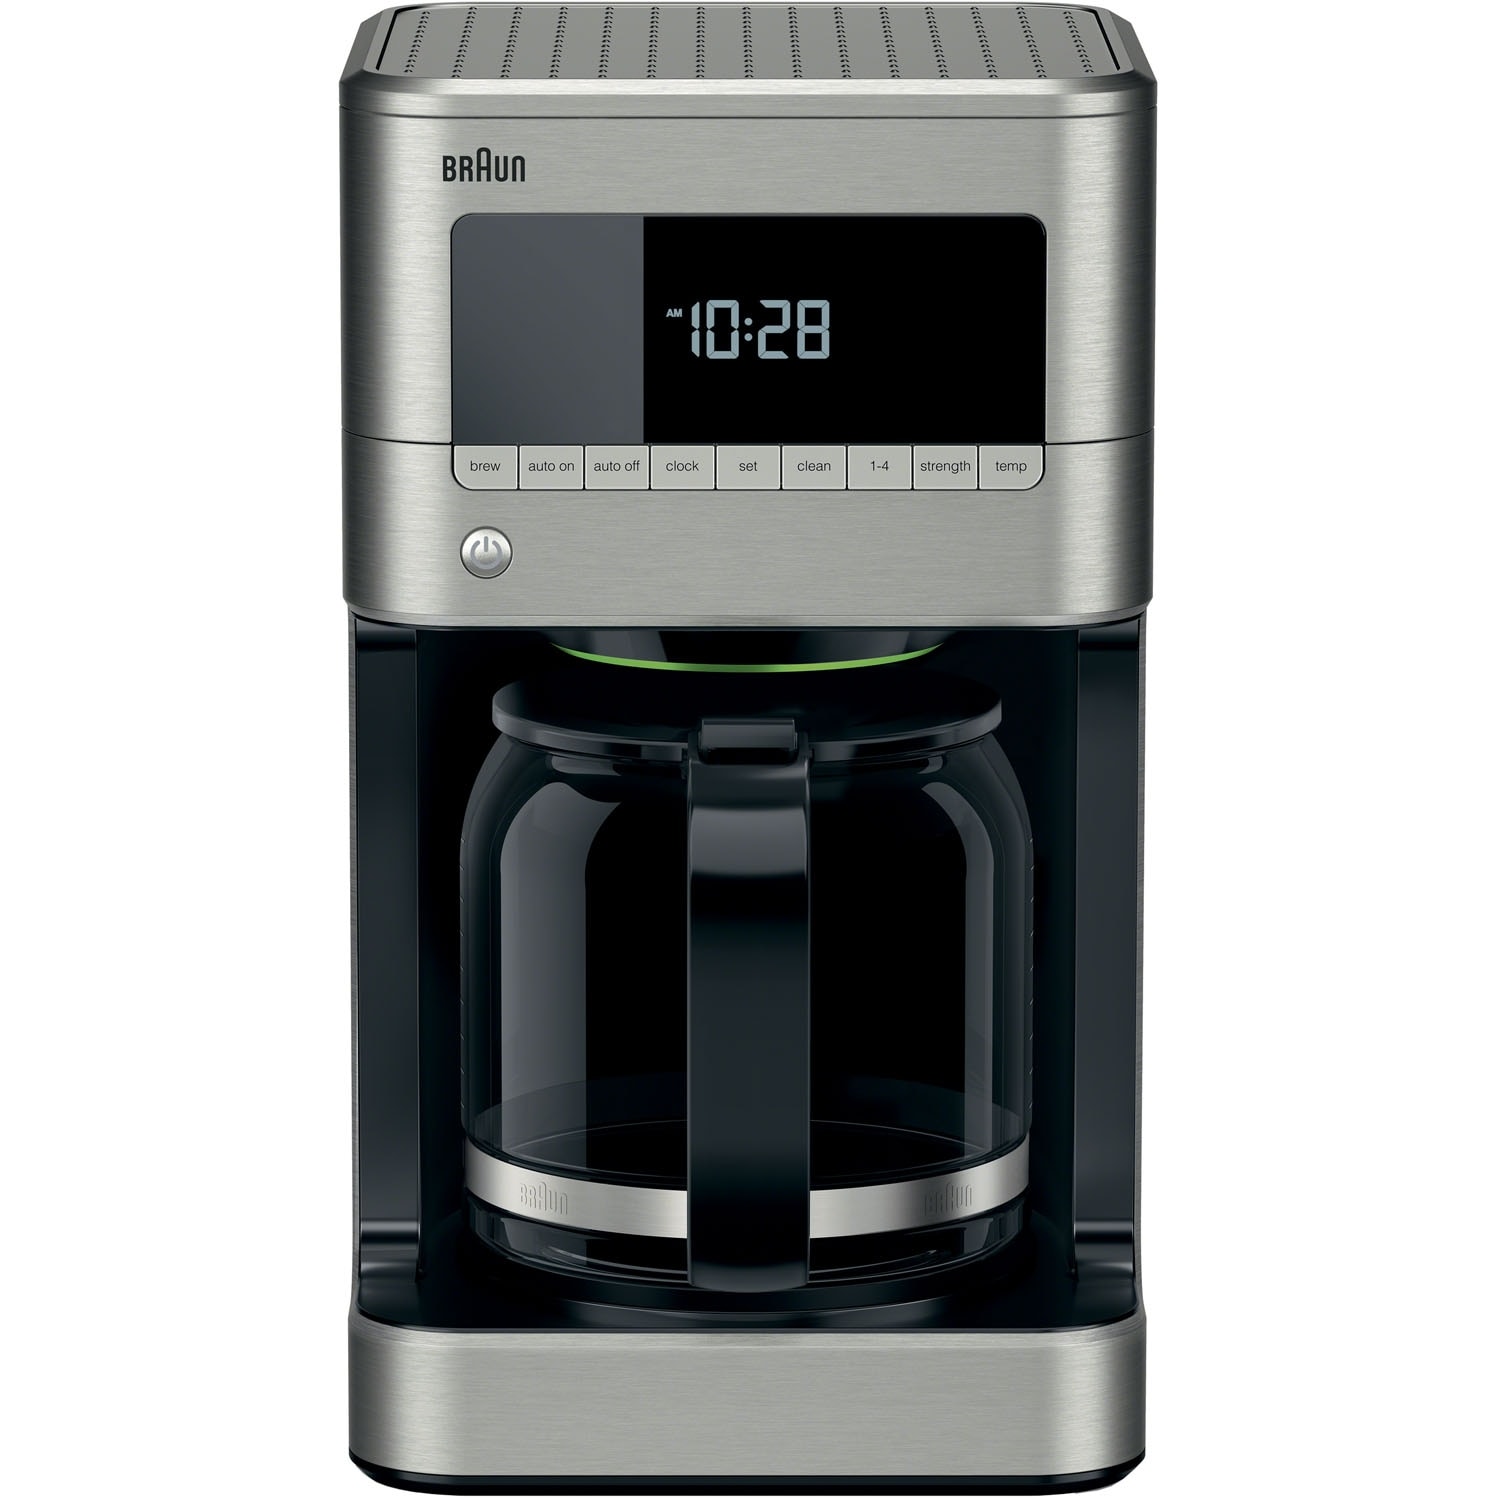 https://ak1.ostkcdn.com/images/products/is/images/direct/3a40ed60a2c69550f4aa3ebeb4ab2a46e98ee025/Braun-BrewSense-12-Cup-Drip-Coffee-Maker-with-Brew-Strength-Selector-and-Glass-Carafe-in-Stainless-Steel.jpg